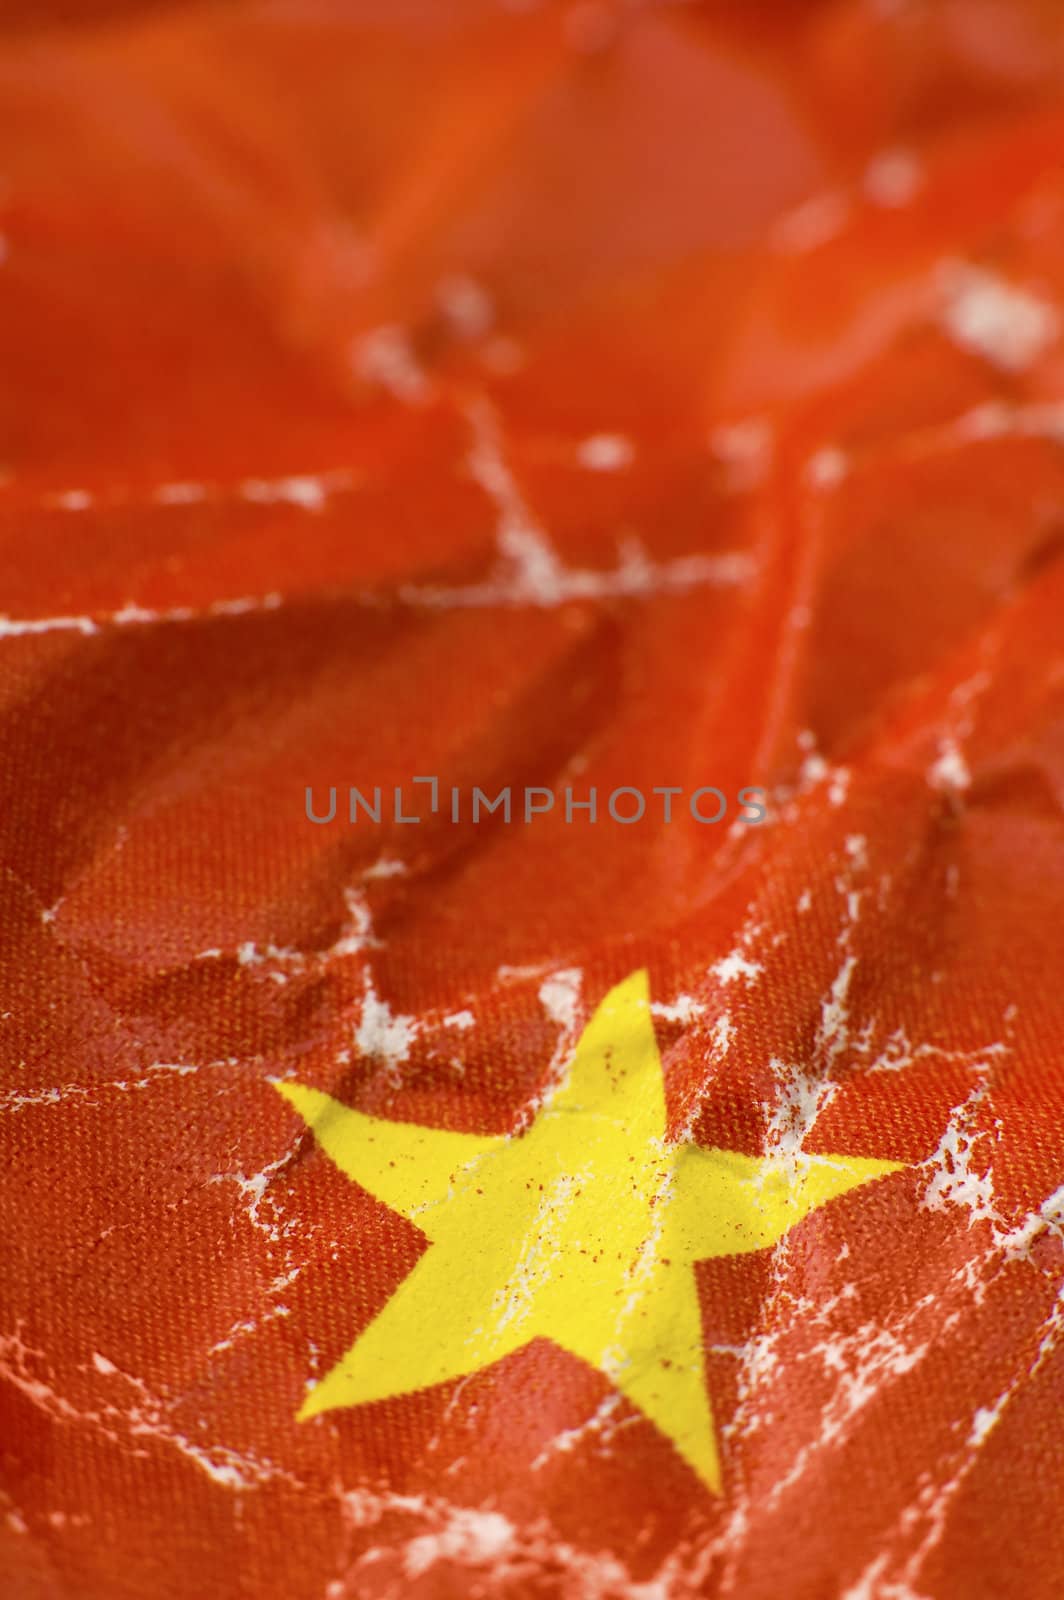 communism background, it is actually a small part of chinese flag, with yellow star in focus